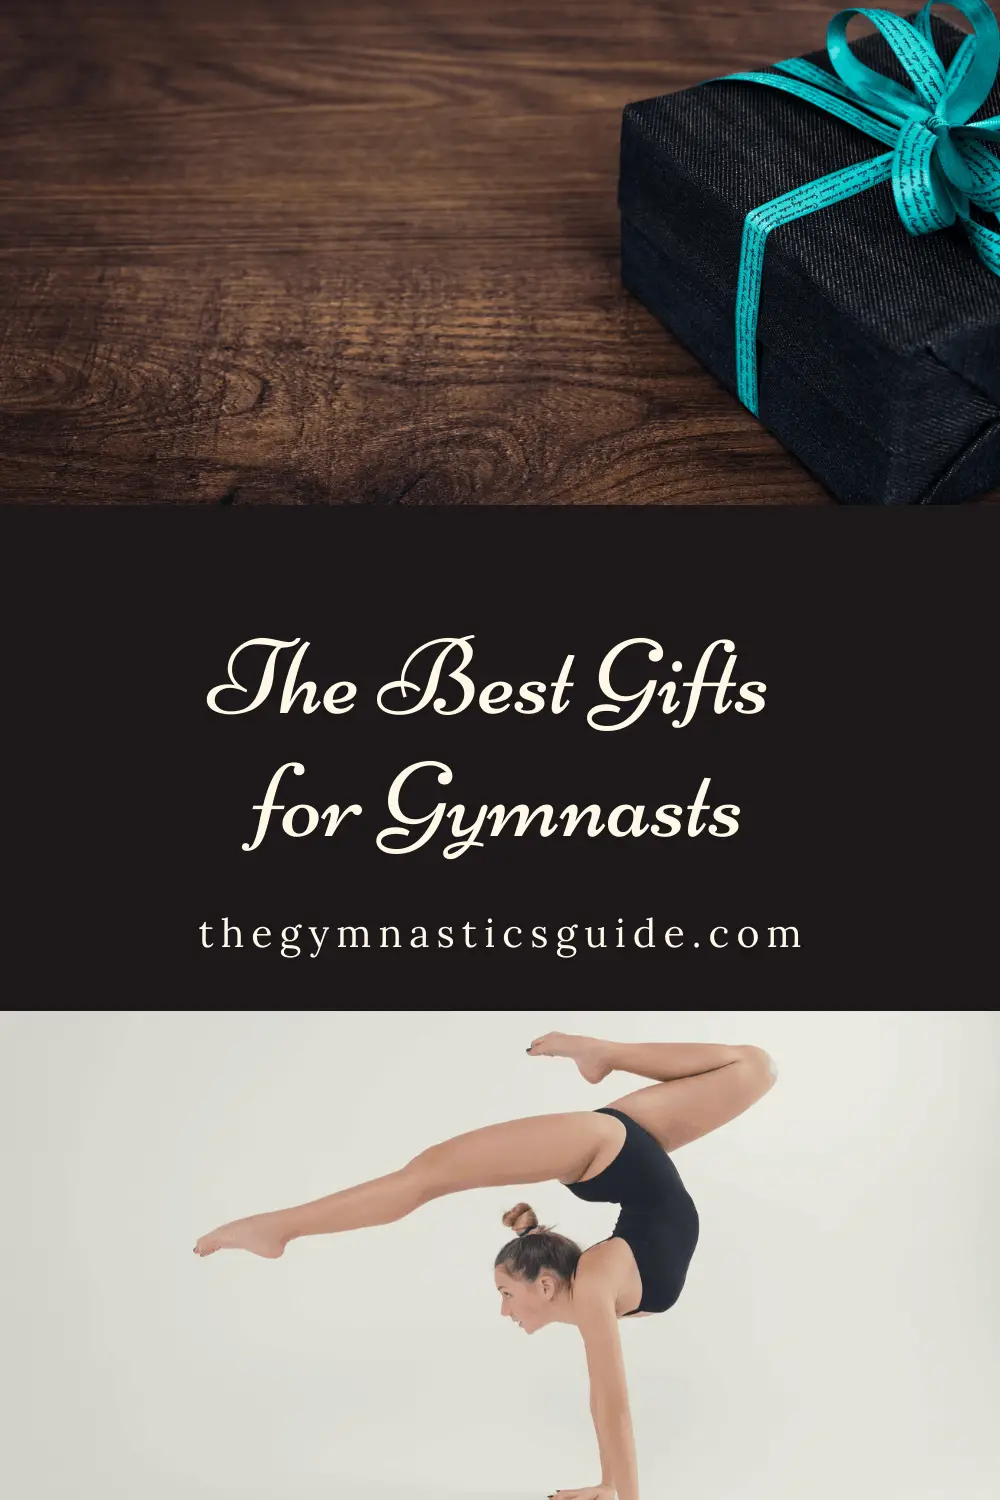 The Best Gifts for Gymnasts (and Coaches!) in 2022